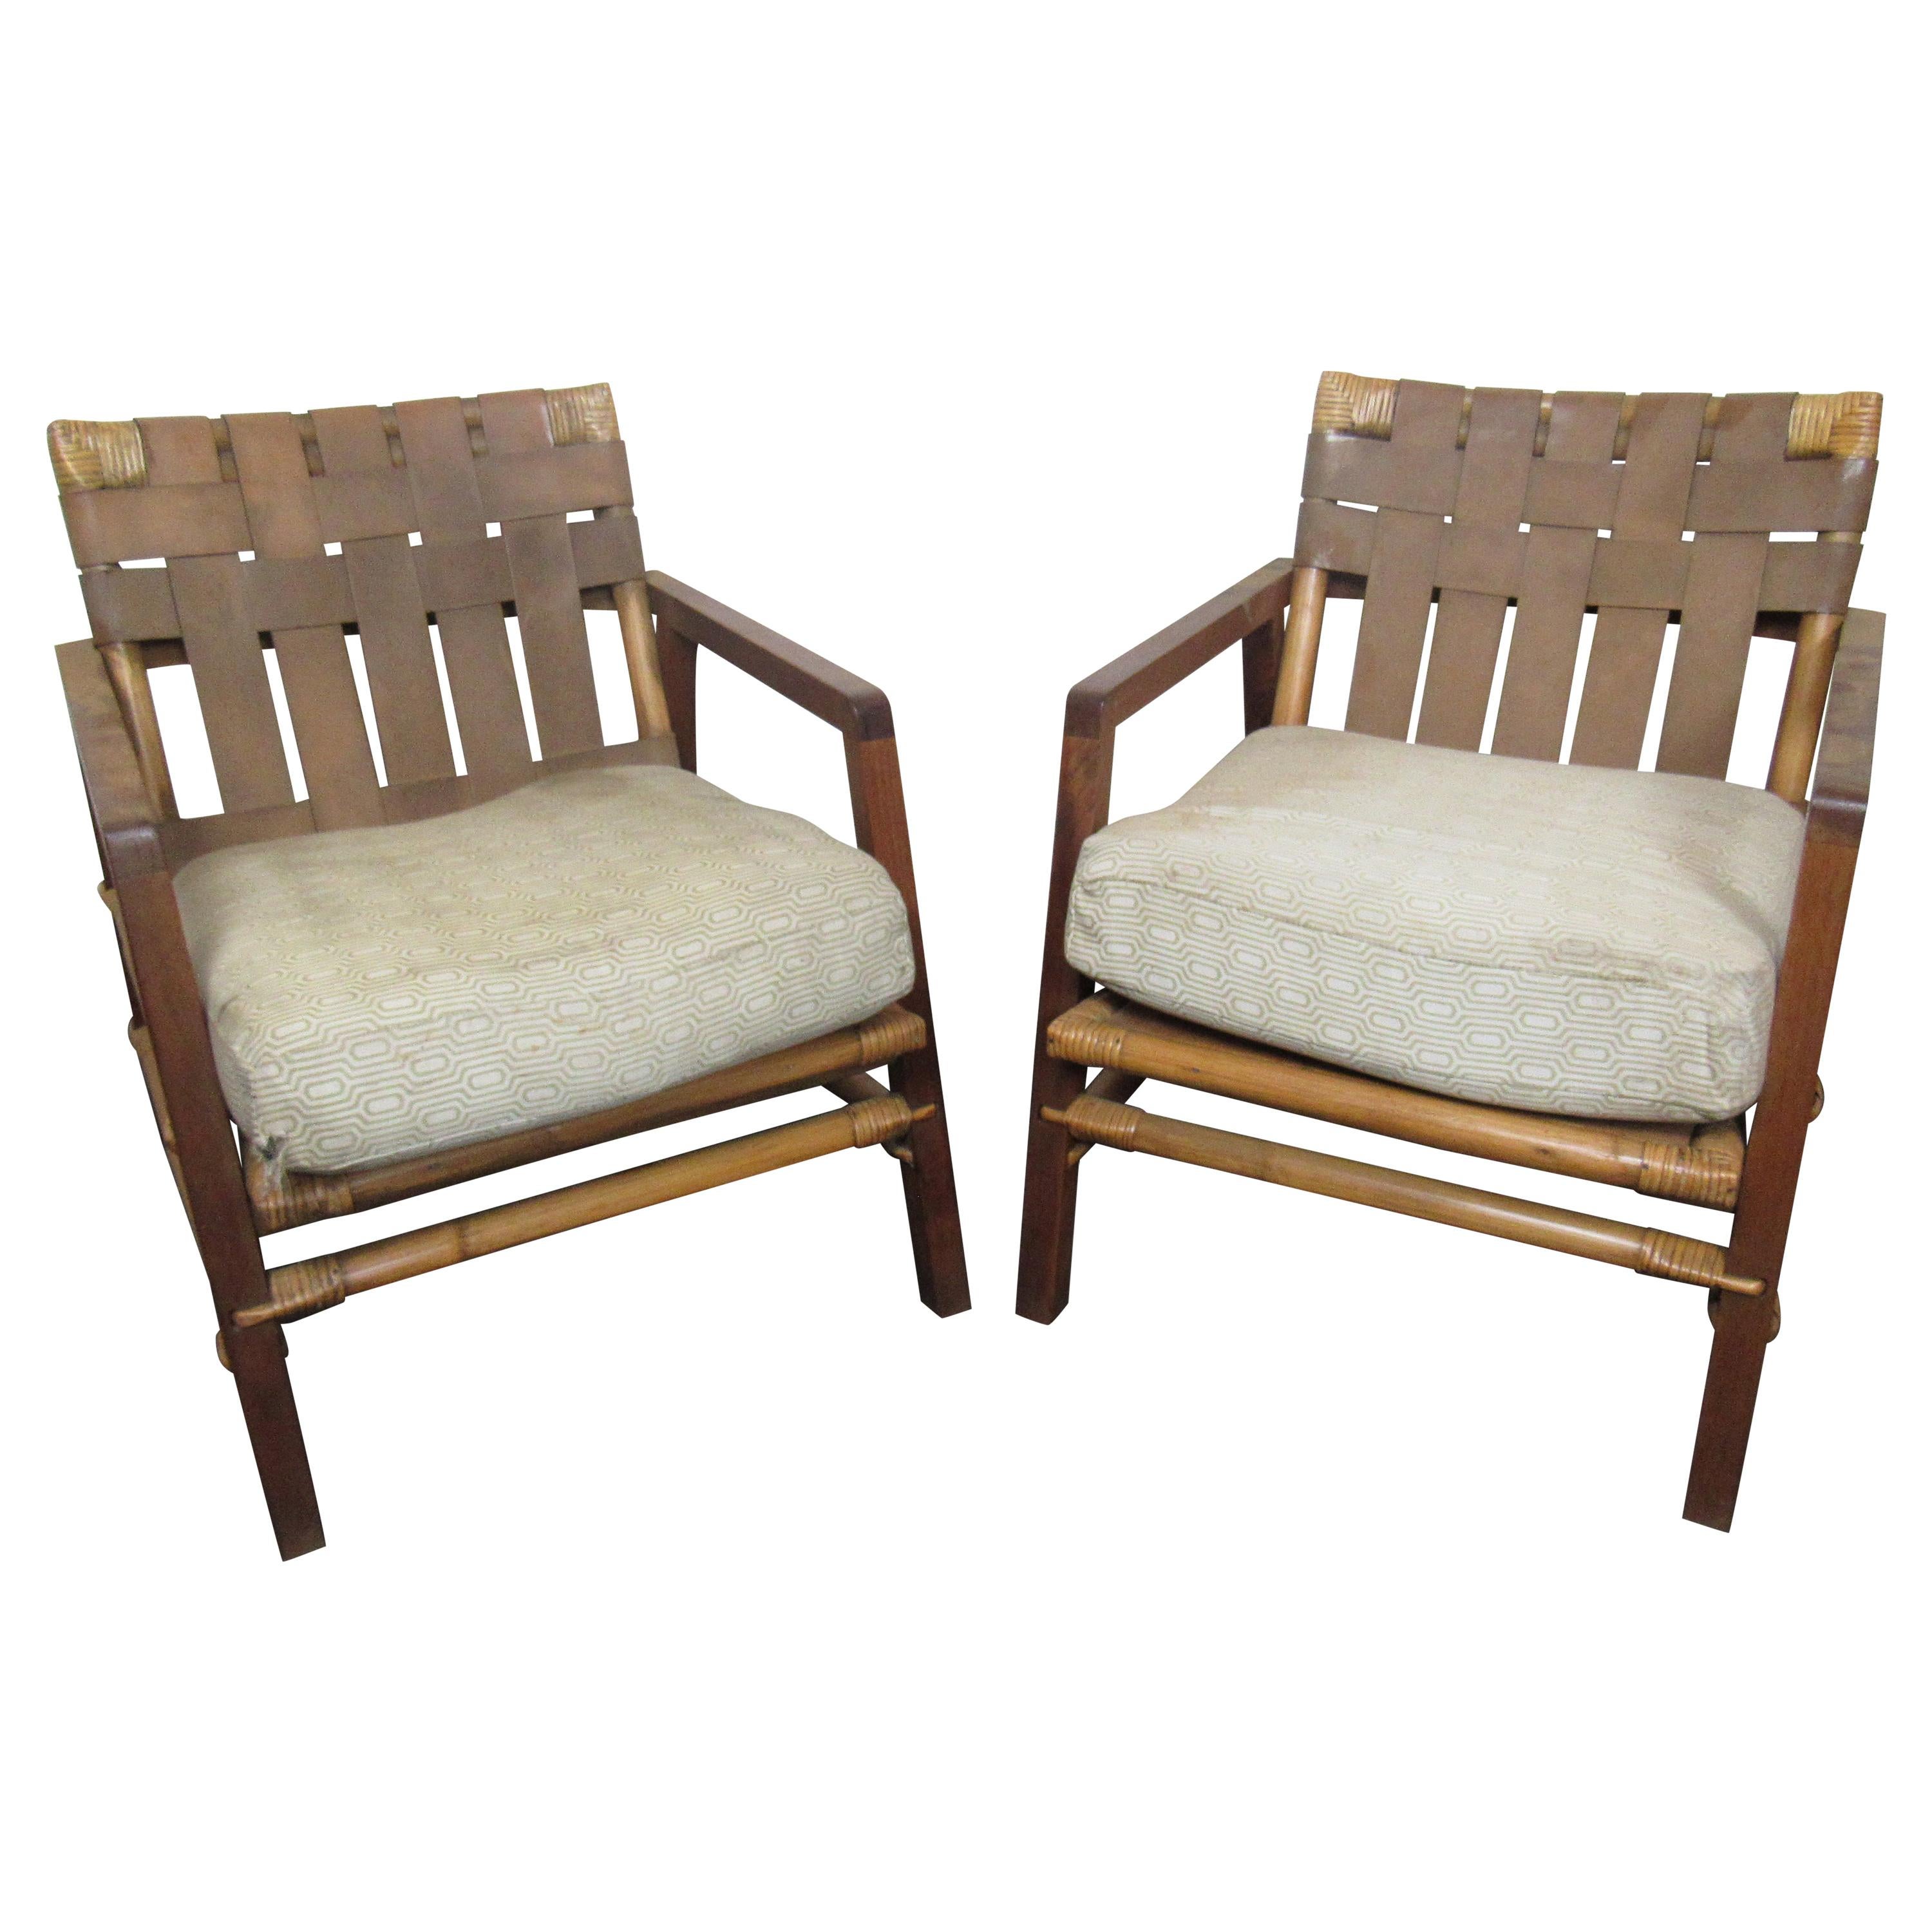 Pair of Bamboo and Teak Lounge Chairs